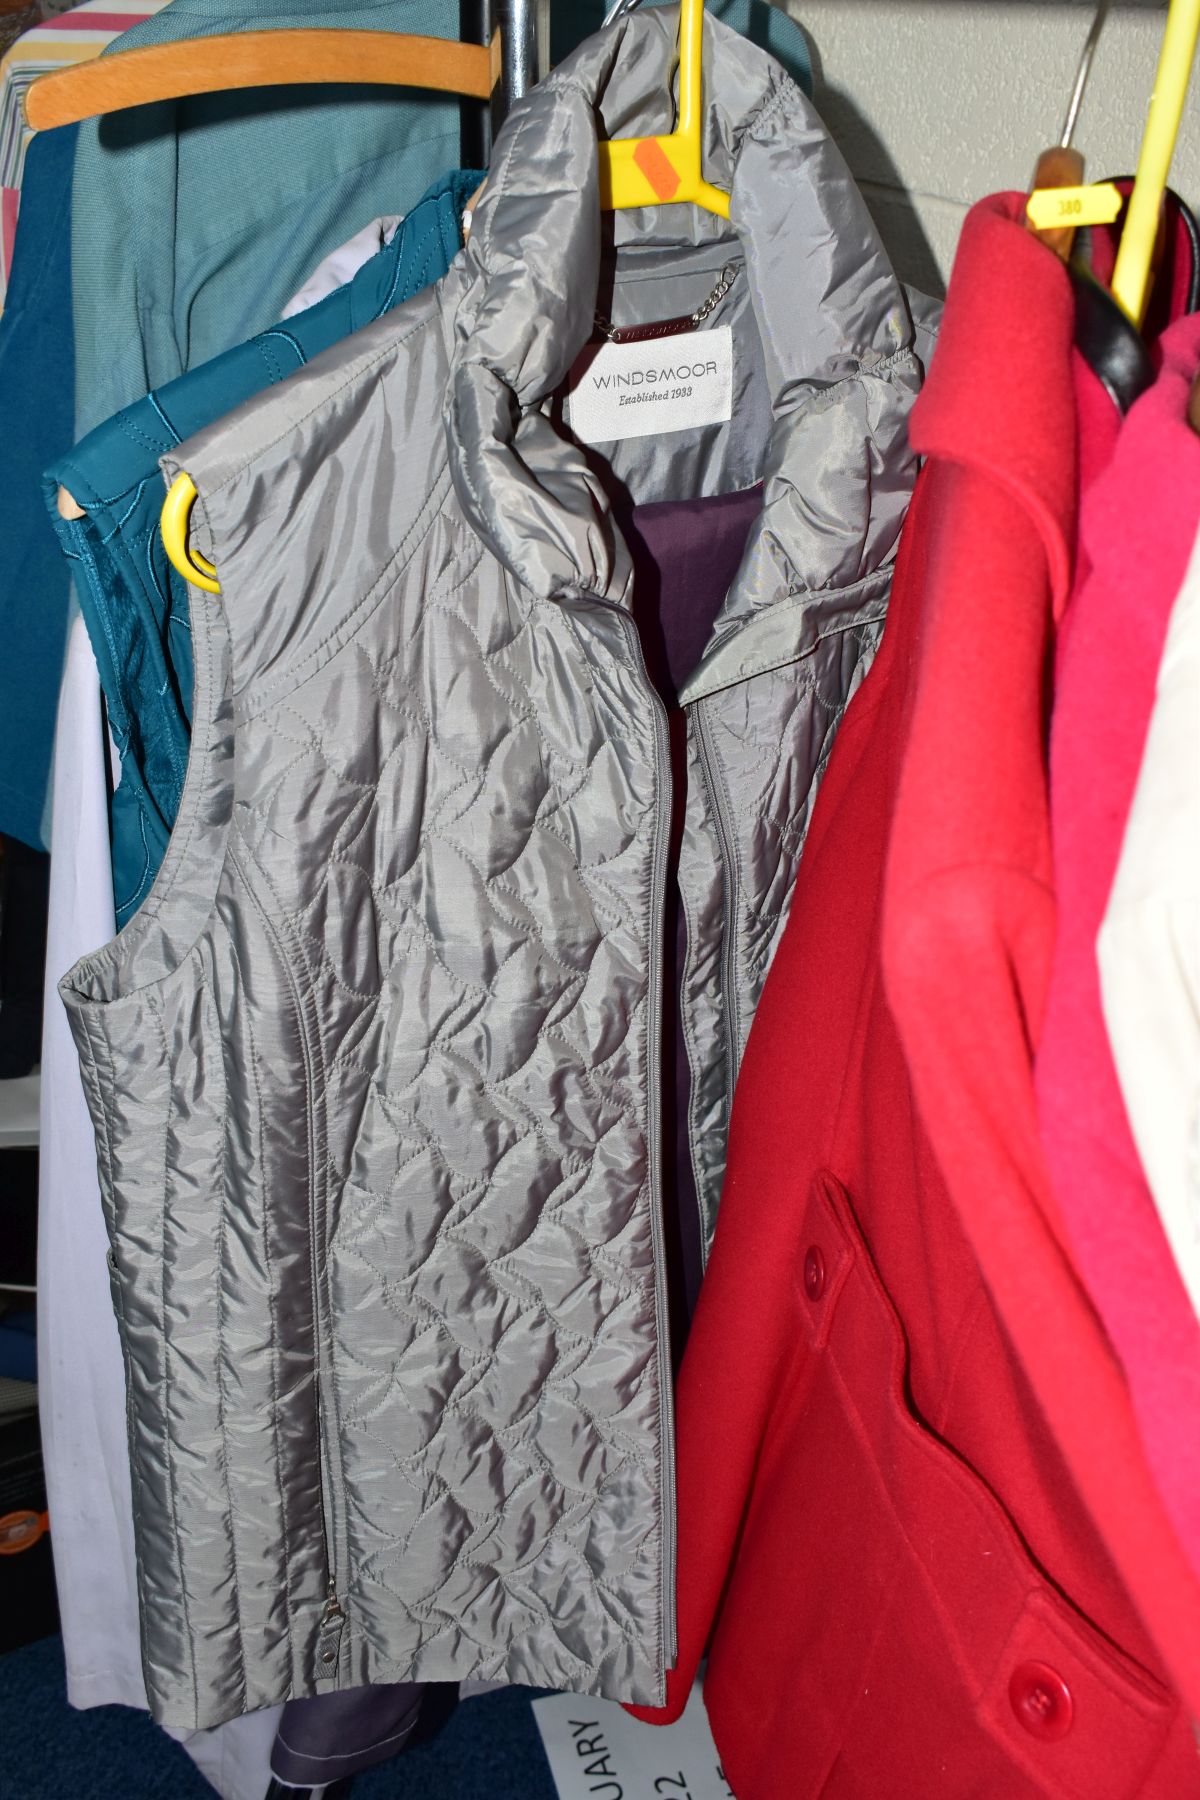 A QUANTITY OF LADIES CLOTHING ETC, to include coats, jackets blouses and jumpers etc brands - Image 12 of 14